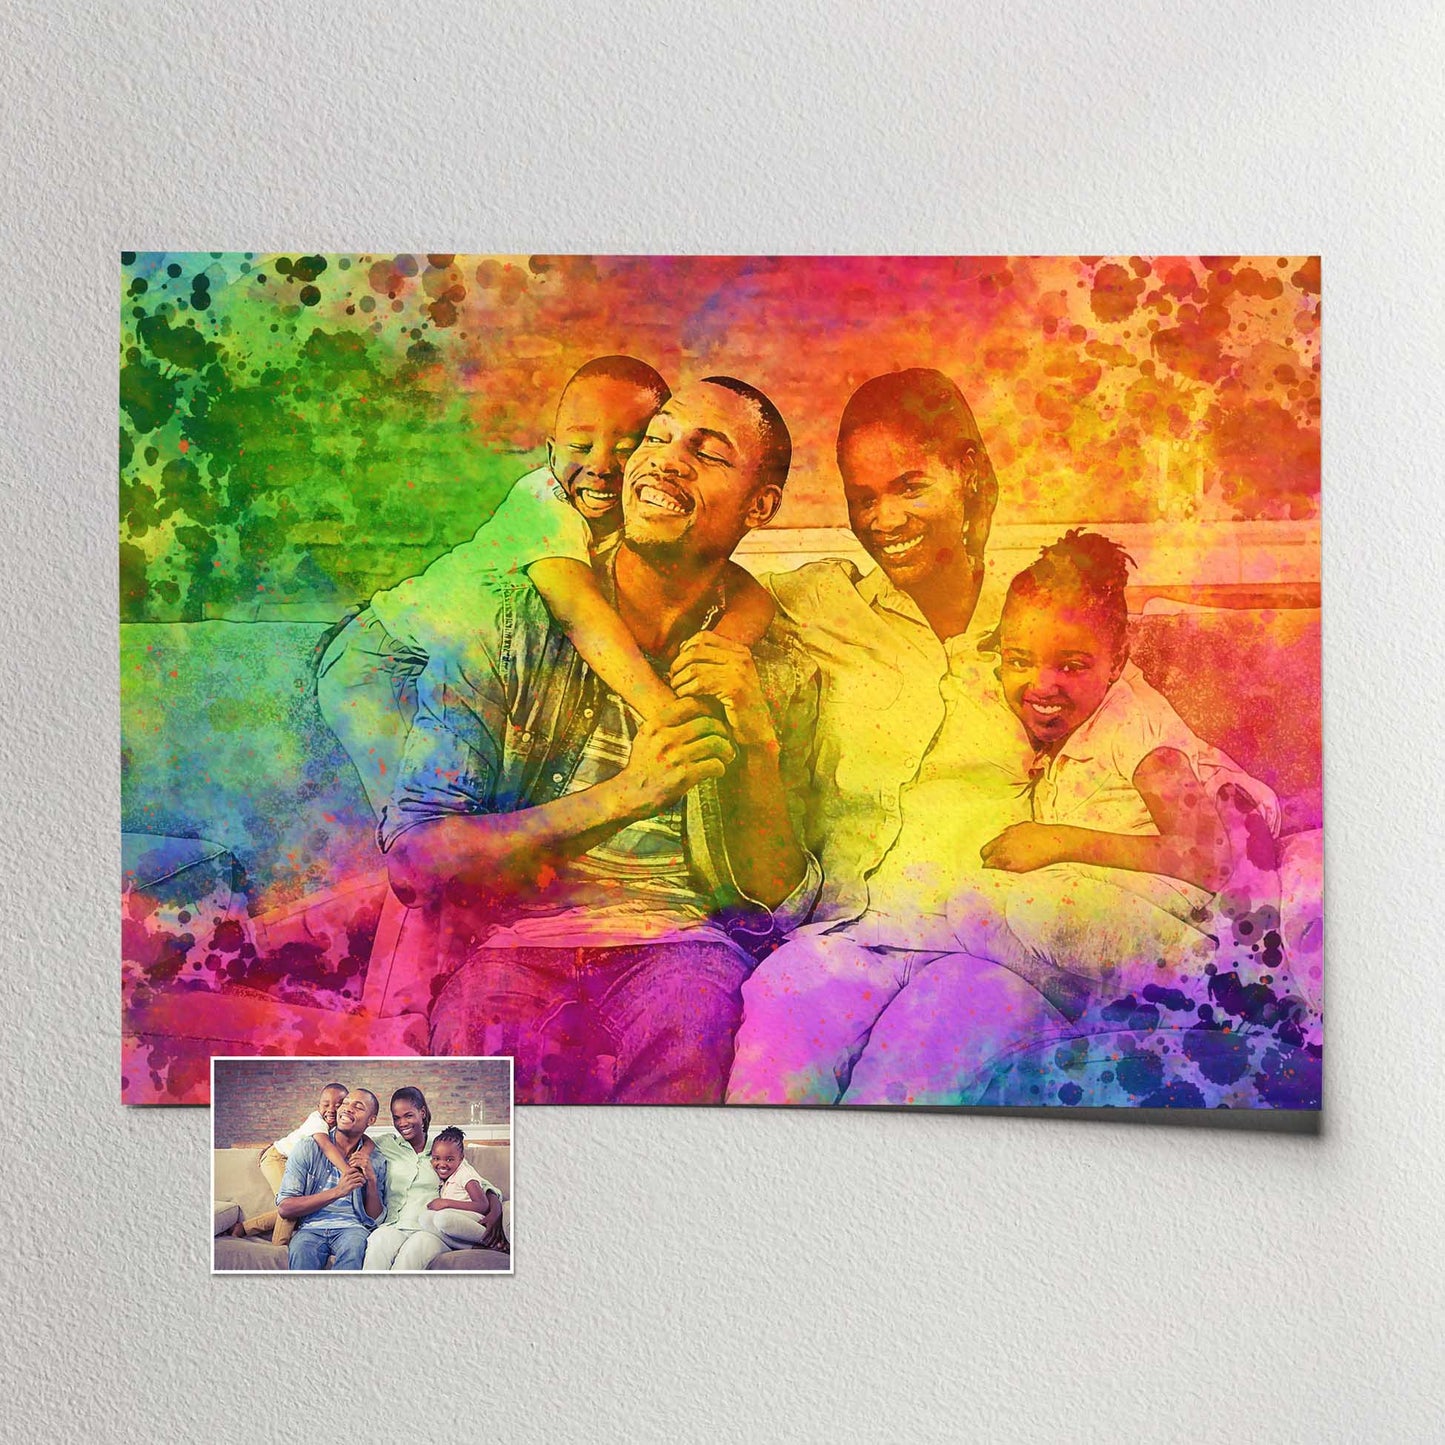 Vibrant Watercolor Art: Our personalised splash of colors print captures the essence of imagination and creativity. The watercolor style and brush color splash effect bring a unique and fabulous visual appeal. Let the vibrant and vivid hues